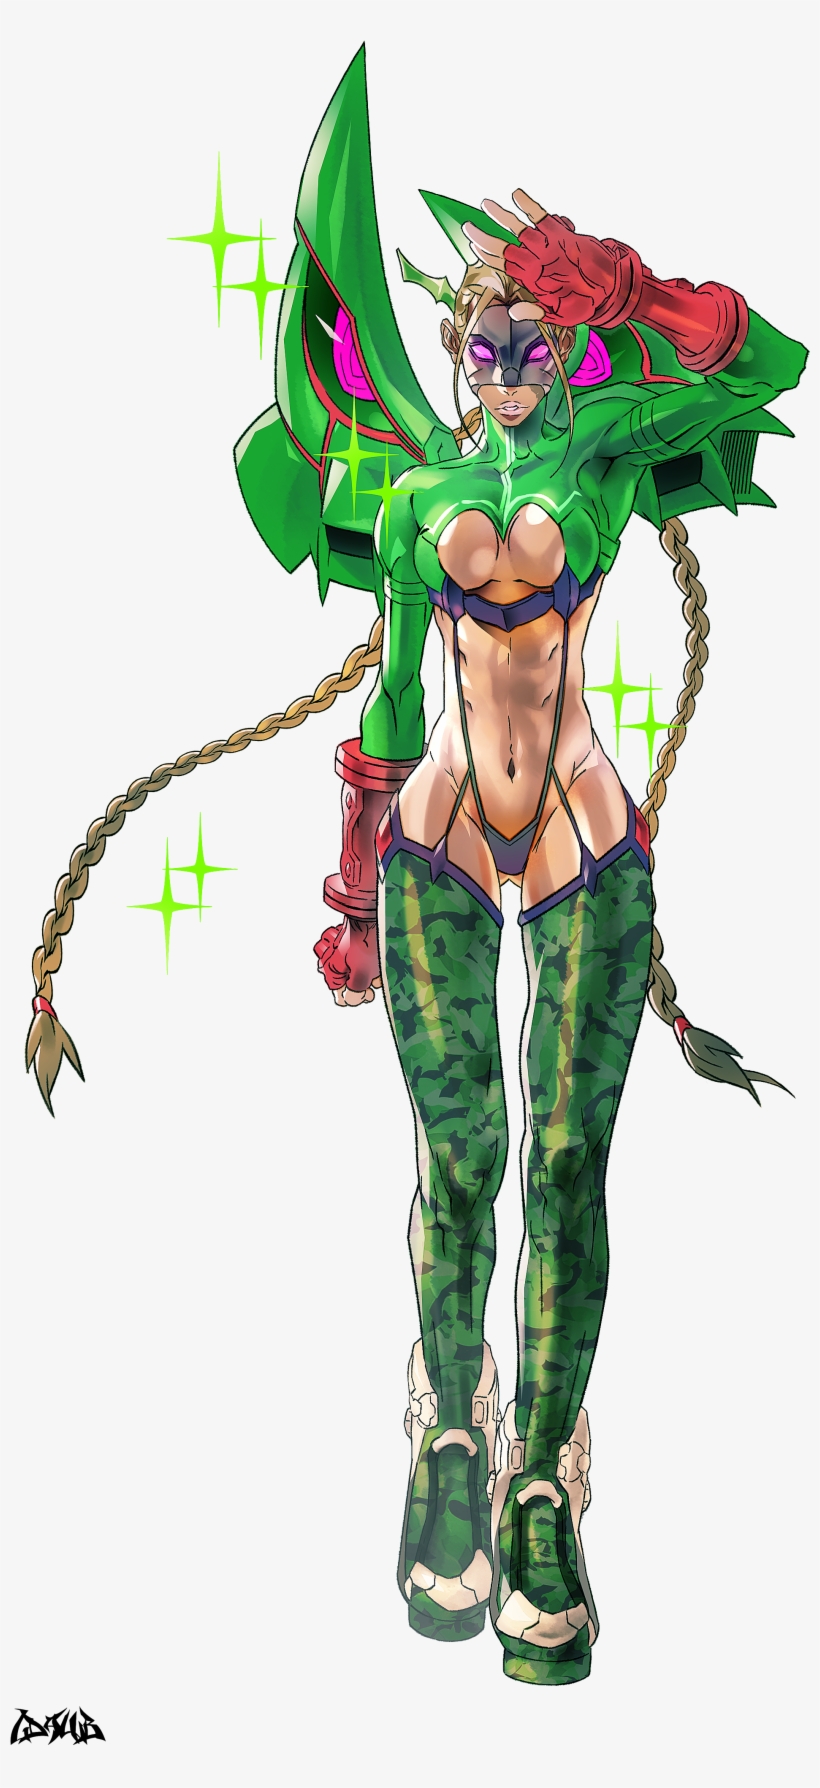 Resized To 36% Of Original - Street Fighter 5 Costumes Alternatif Cammy, transparent png #1828491